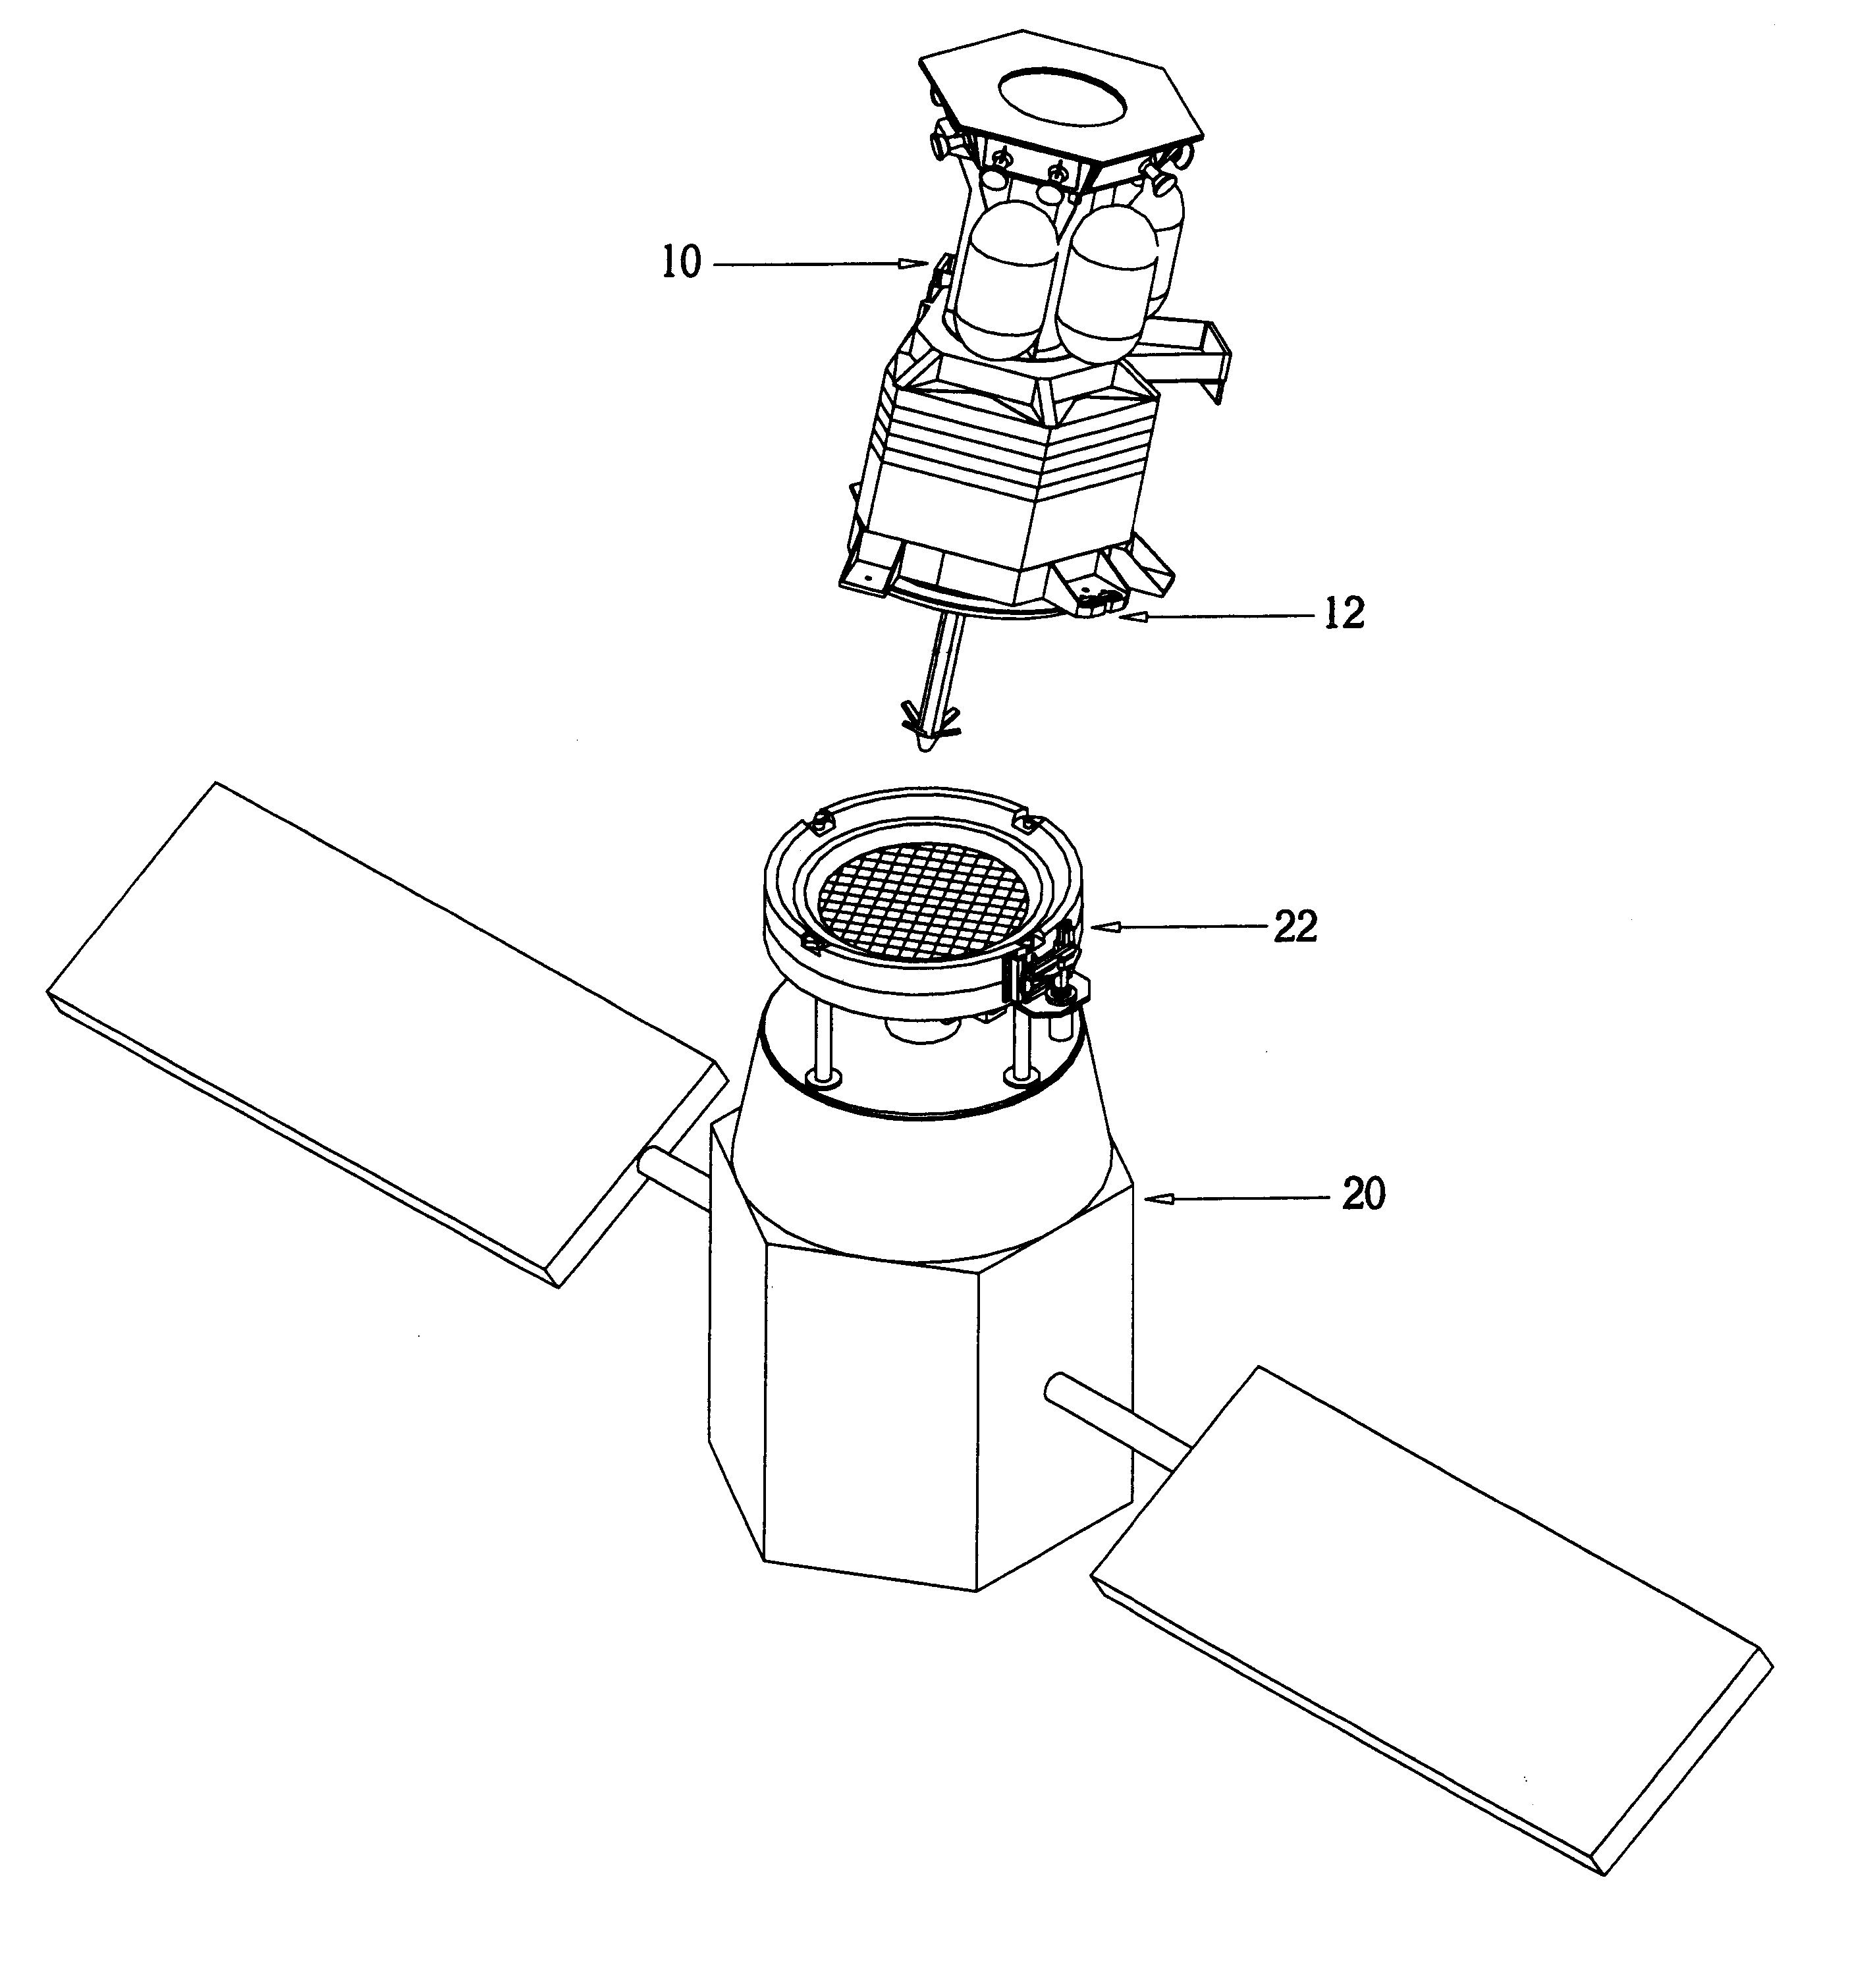 Spacecraft capture and docking system